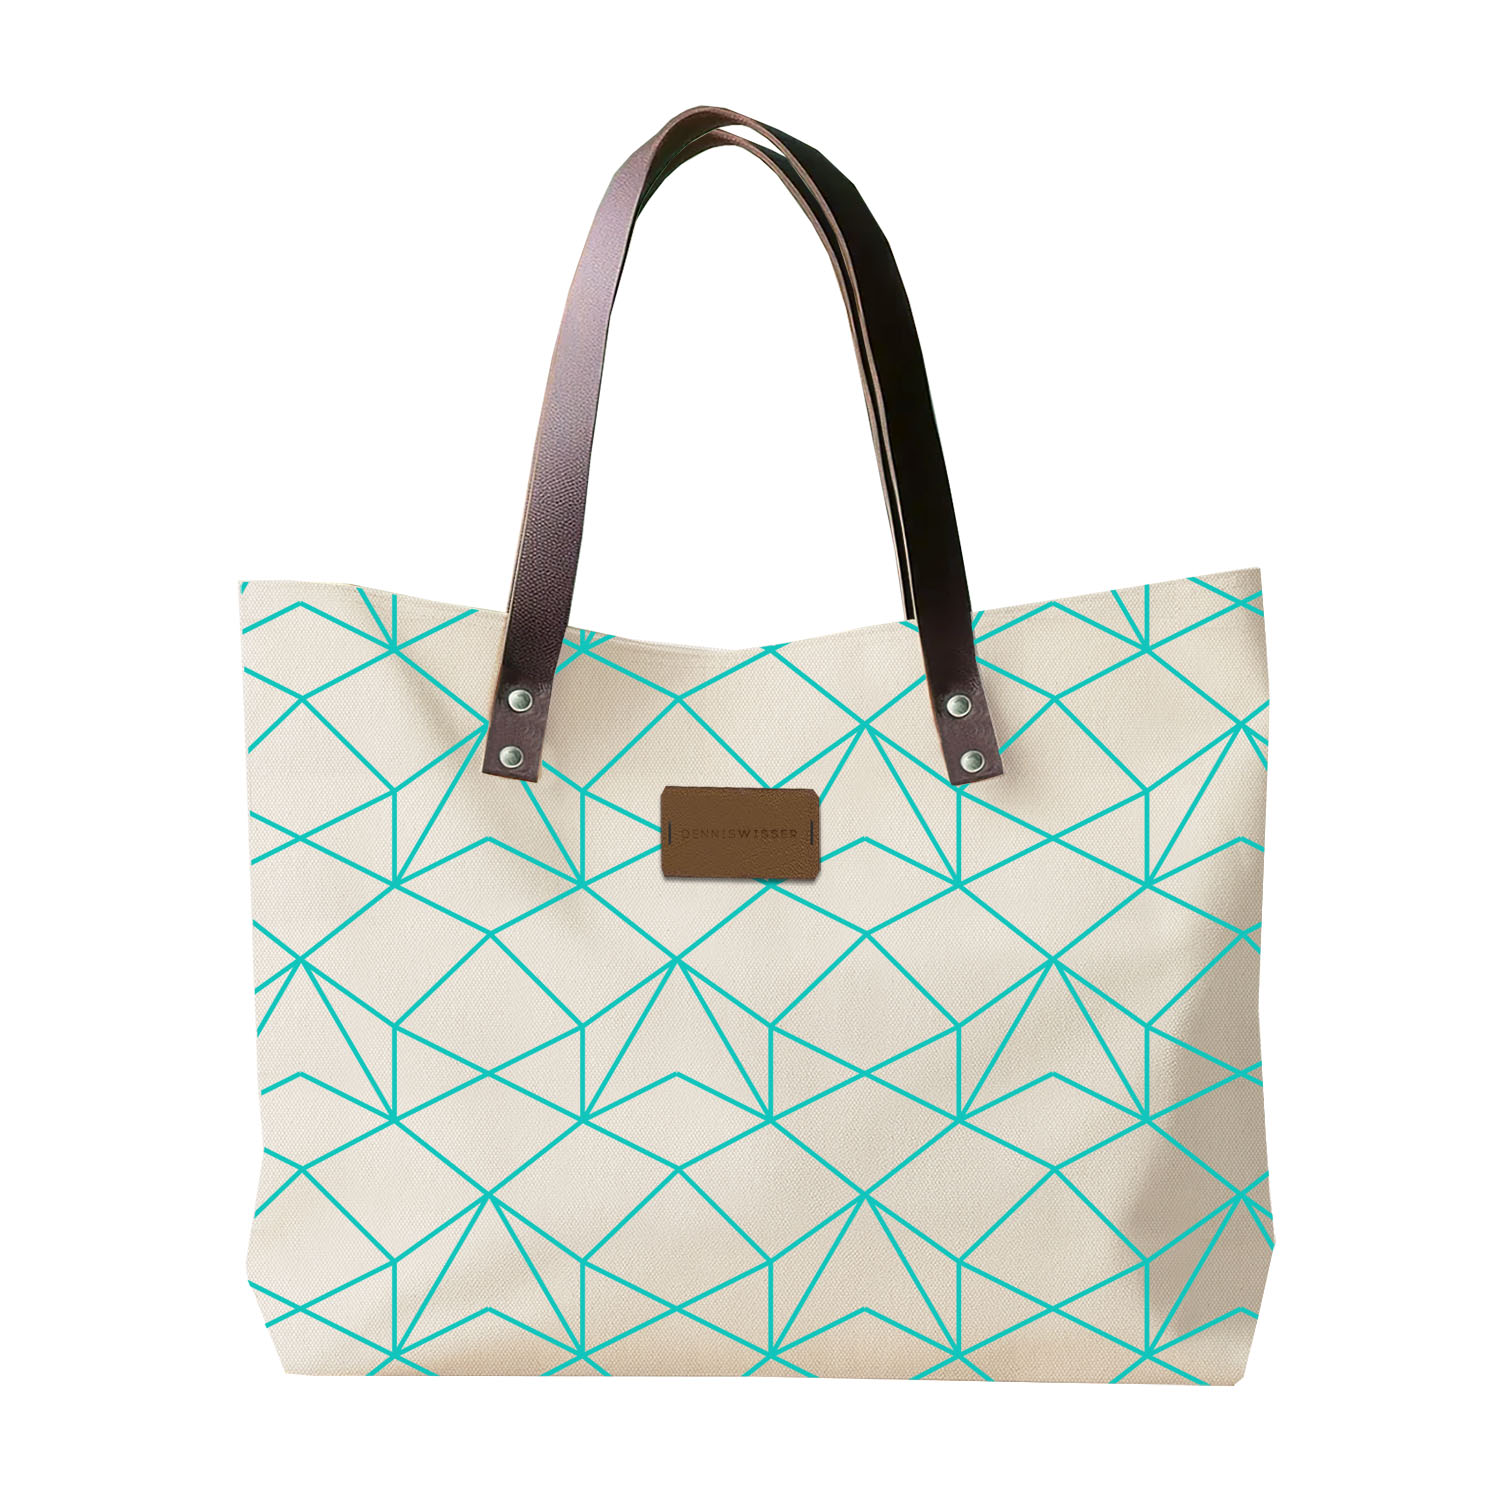 Custom printed cotton canvas tote bag with leather shoulder straps